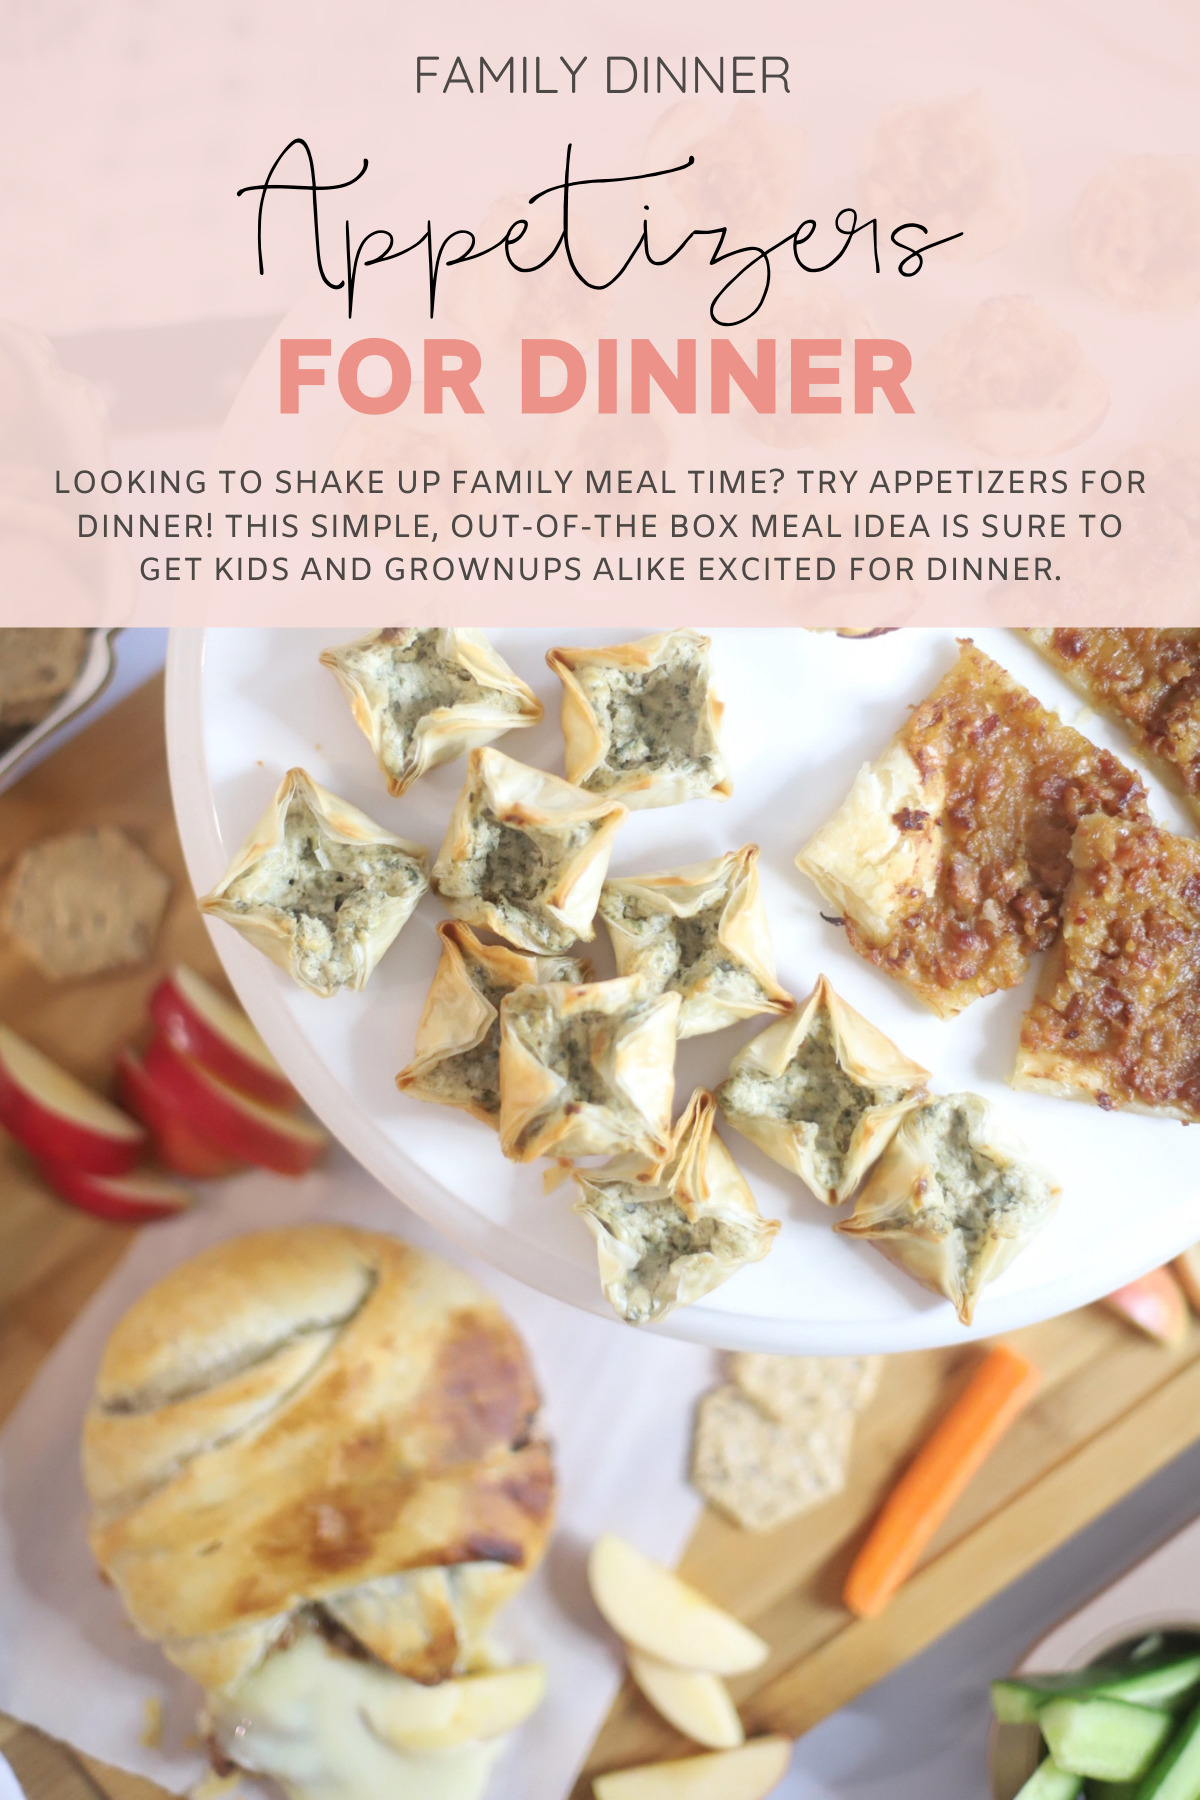 Looking to shake up family meal time? Try appetizers for dinner! This simple, out-of-the box meal idea is sure to get kids and grownups alike excited for dinner.| @glitterinclexi | GLITTERINC.COM